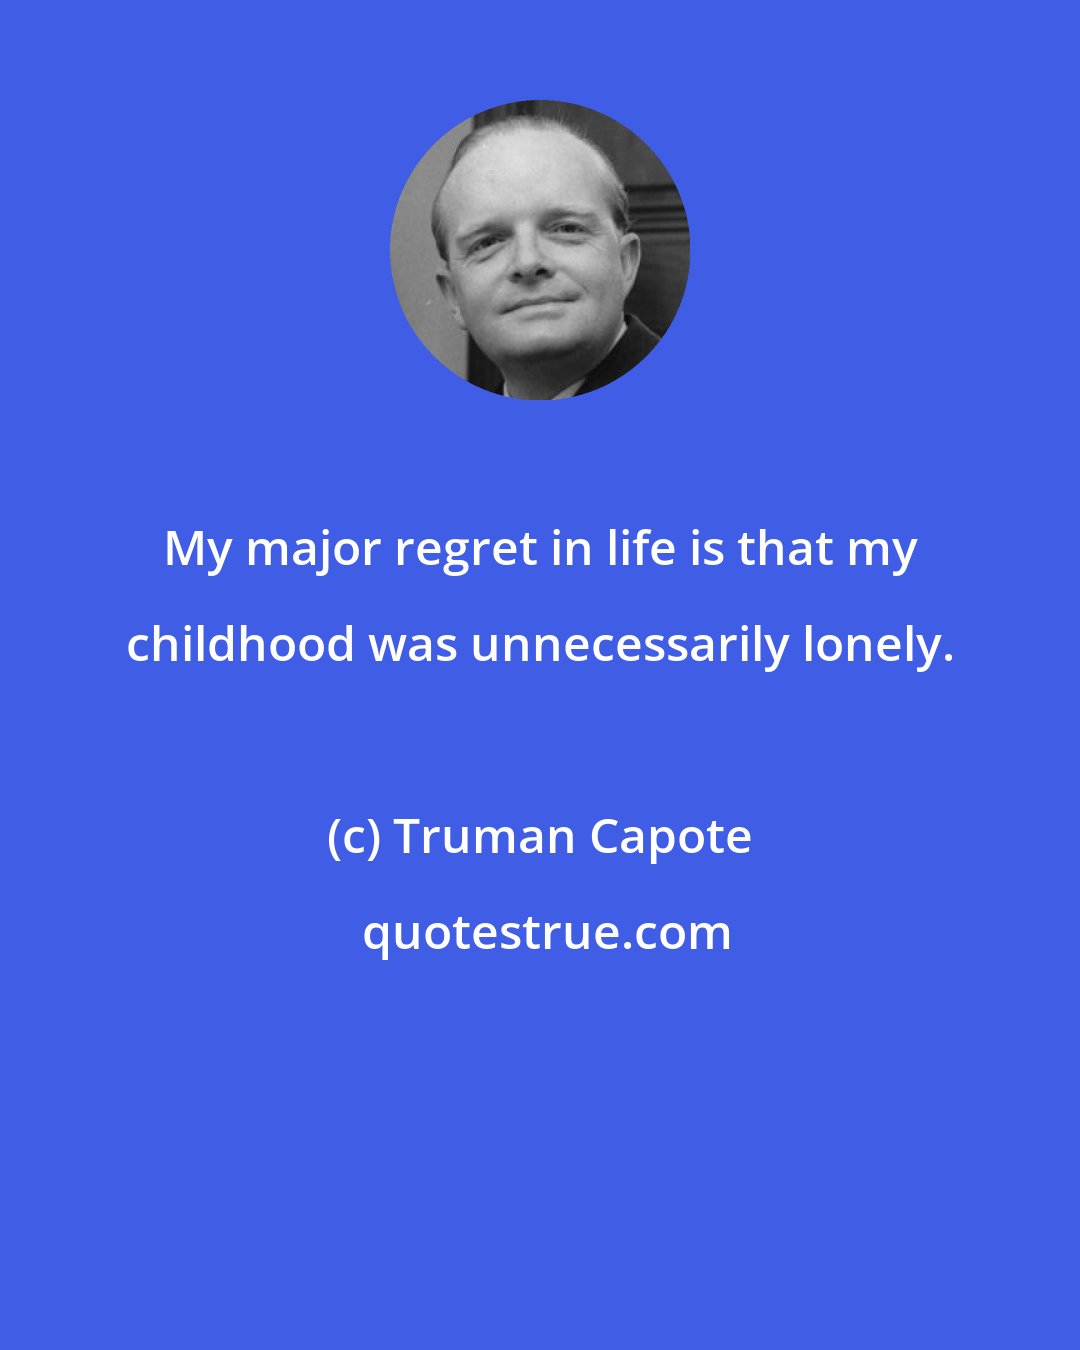 Truman Capote: My major regret in life is that my childhood was unnecessarily lonely.